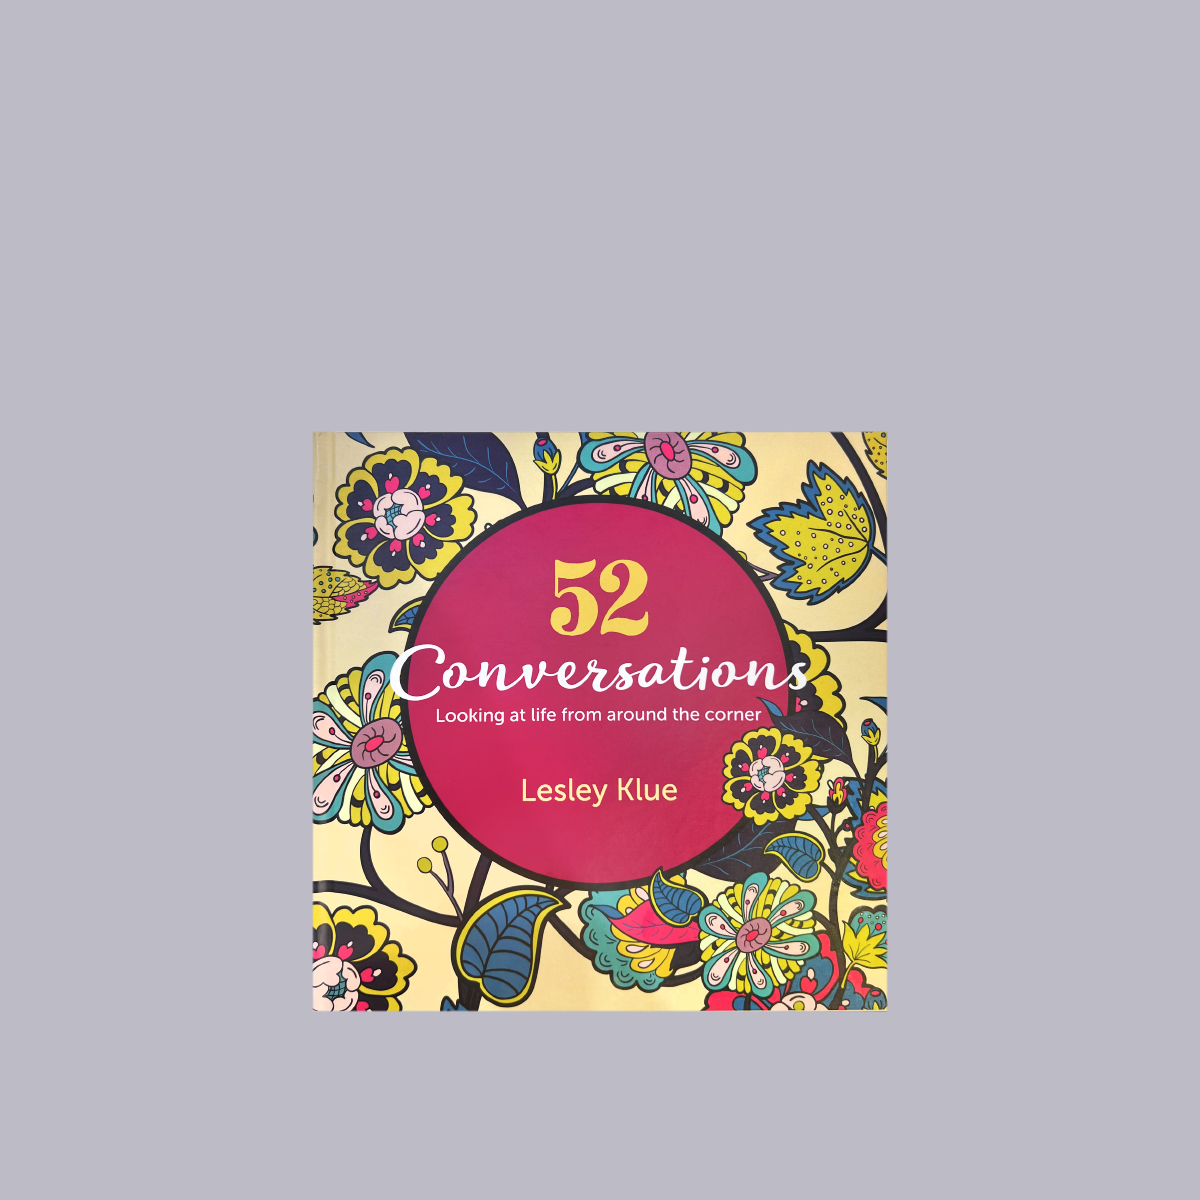 52 Conversations | Looking at Life | Lesley Klue